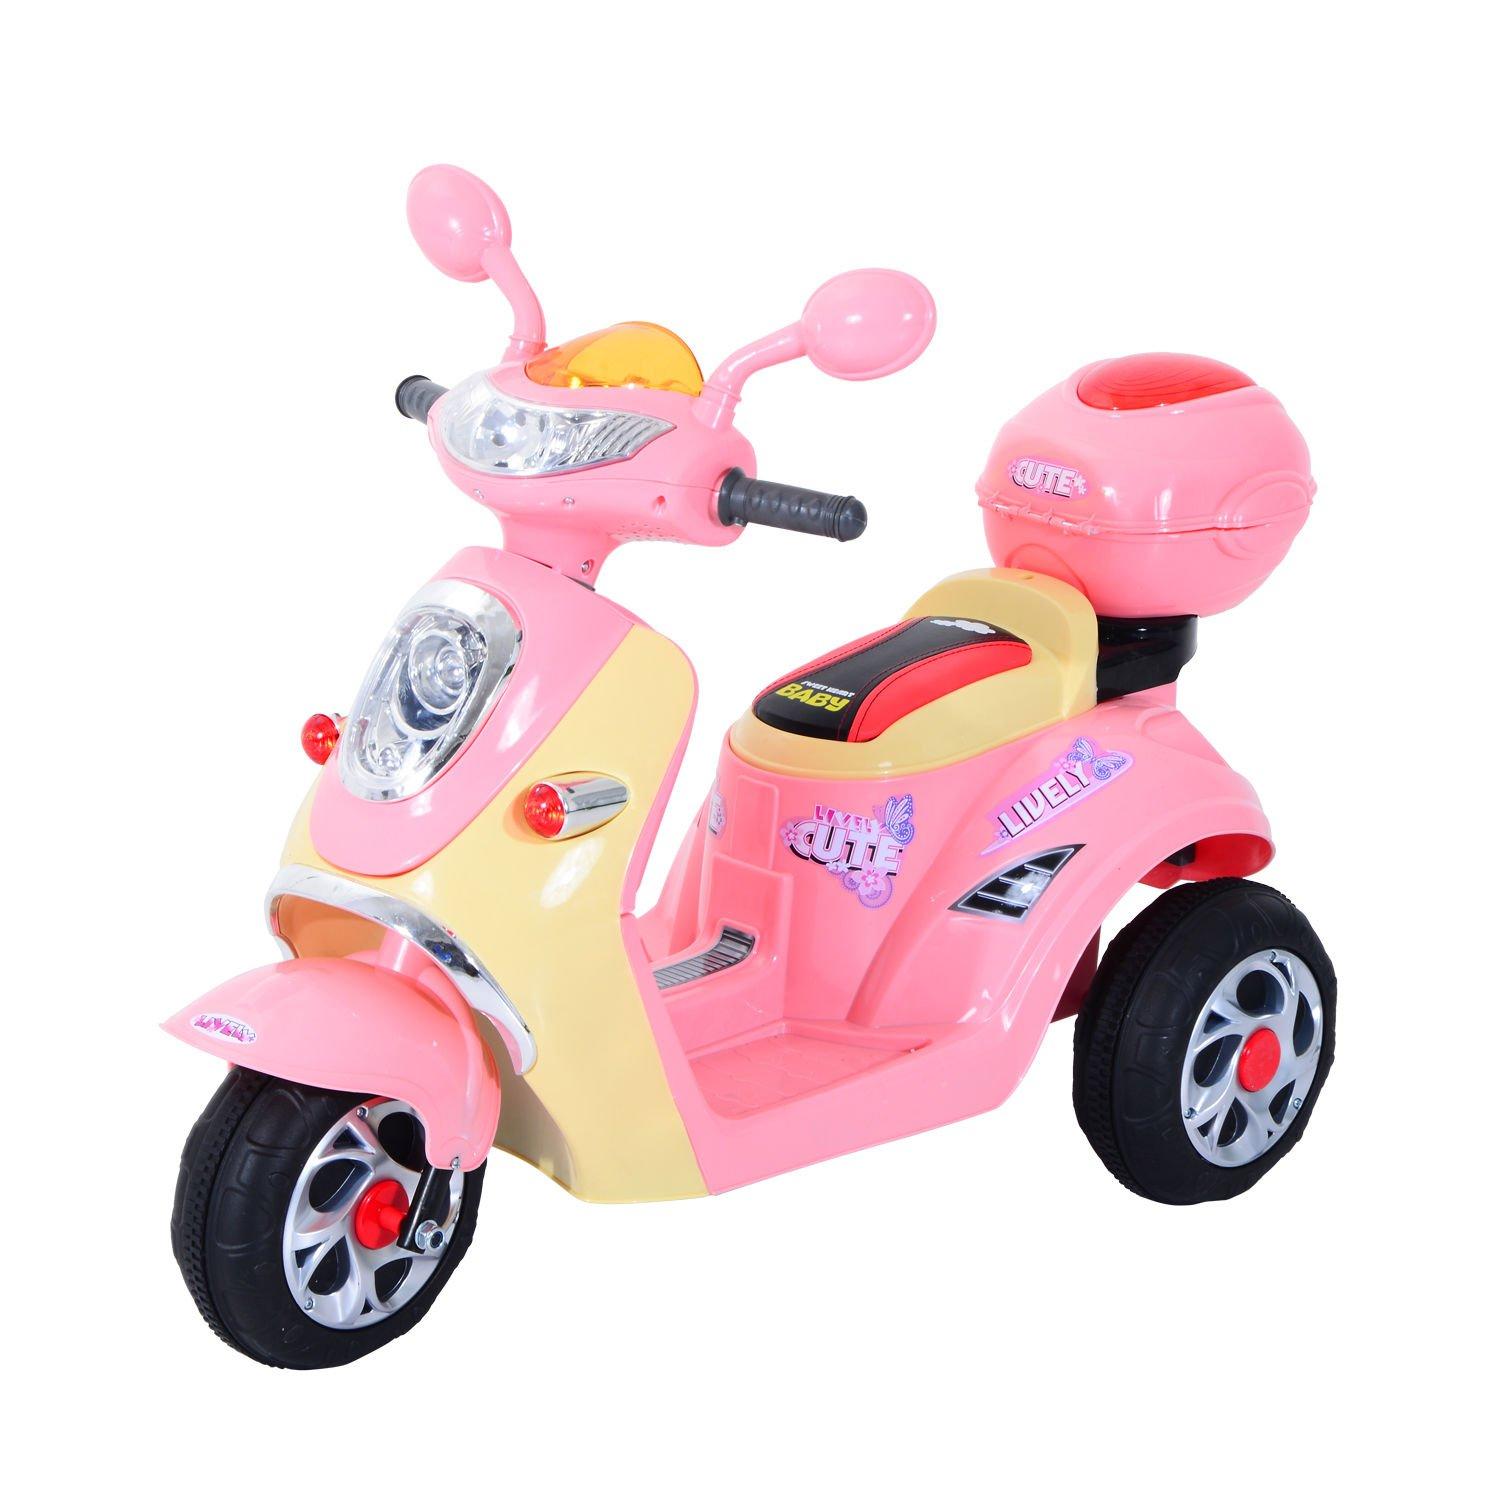 HOMCOM Electric Ride on Toy Motorbike Children Motorcycle Tricycle Safe 6V